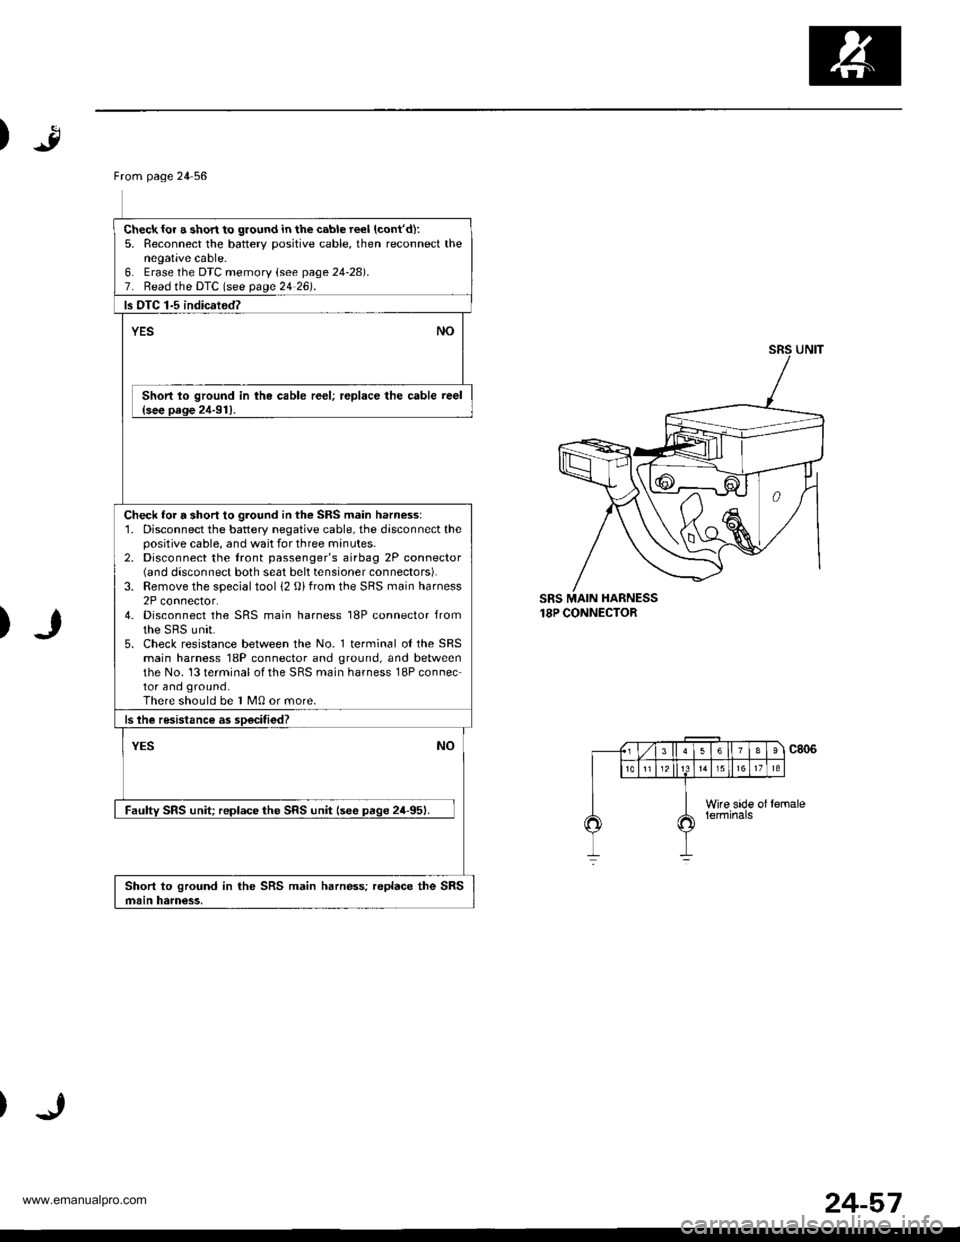 HONDA CR-V 2000 RD1-RD3 / 1.G Service Manual 
)
SRS MAIN HARNESS18P CONNECTOR
)
From page 24 56
Check{or a short to ground in the cable reel (contd):
5. Reconnect the batterv positive cable, then reconnect thenegative cable.6. Erase lhe DTC mem